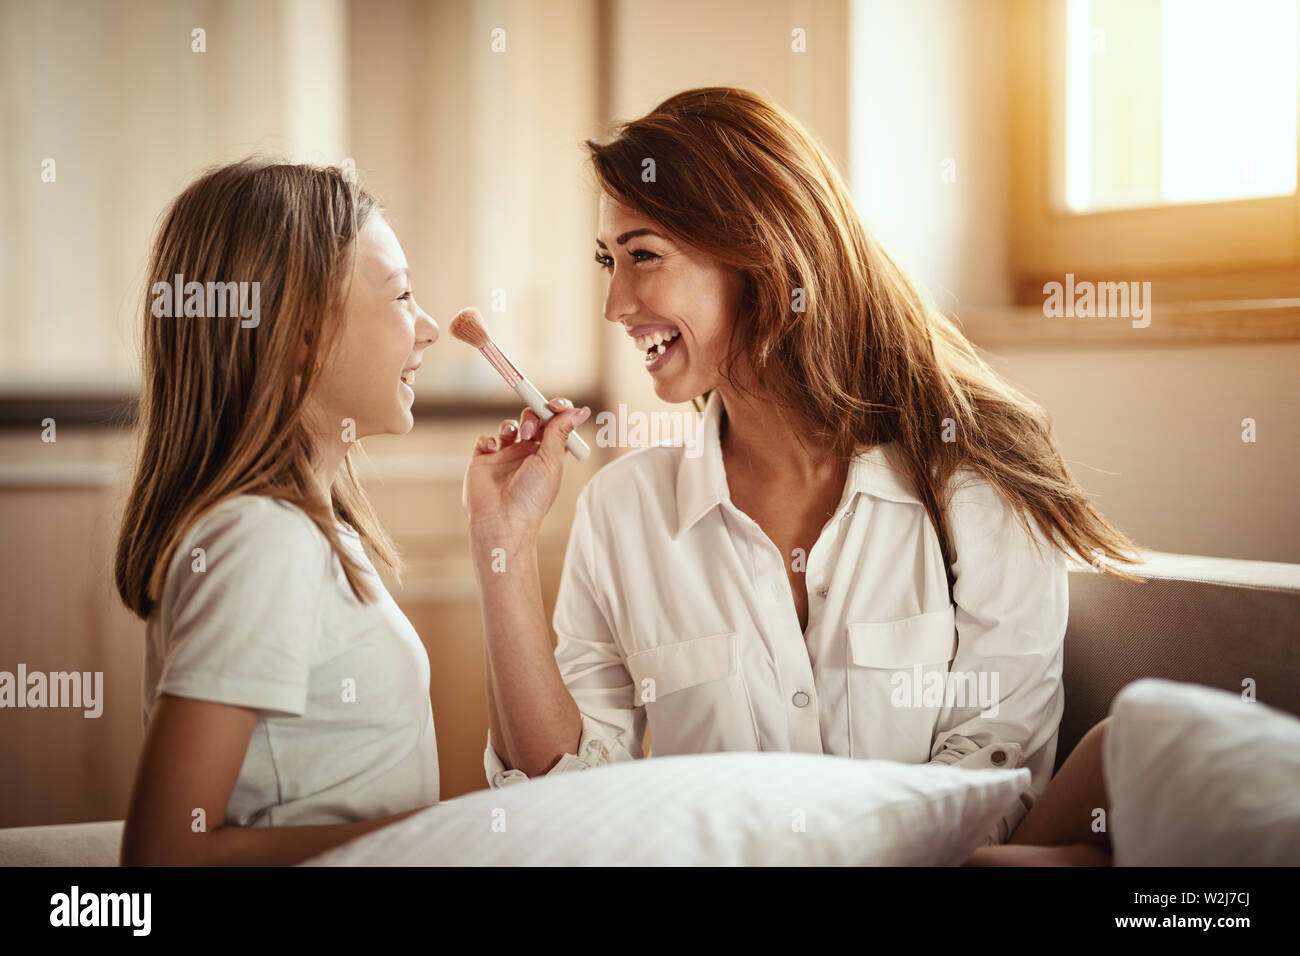 Little Daughter And Her Young Mother Are Having Fun Playing Beauty Salon And Mother Is Putting Makeup On Her Daughter S Face With Big Puffy Brush Stock Photo Alamy